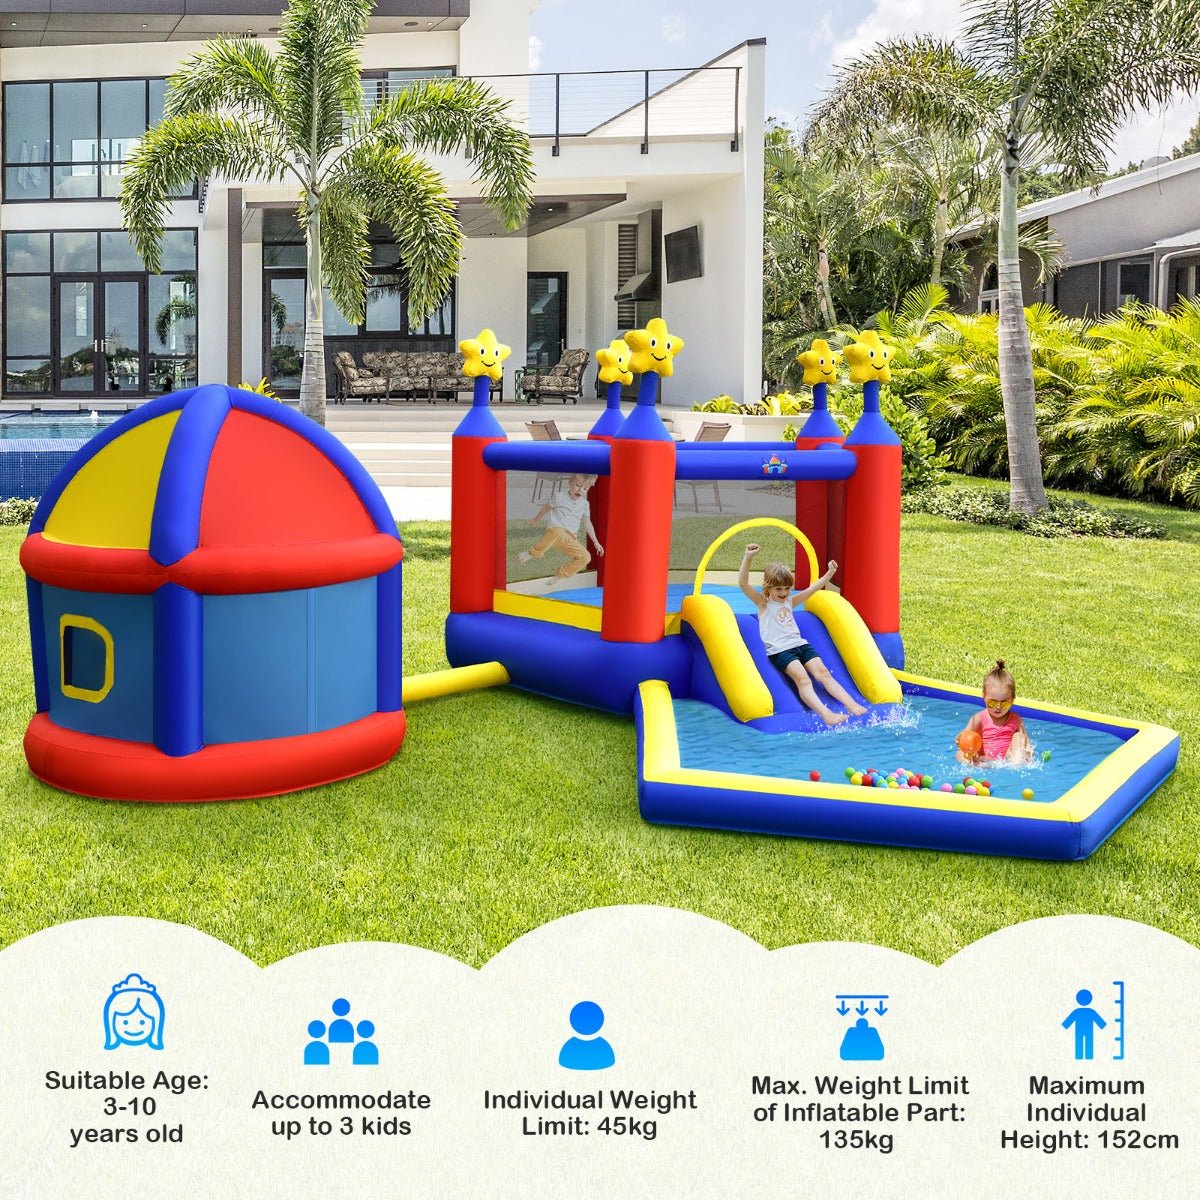 Inflatable Bouncy House with Double Basketball Hoops - Fun for Kids